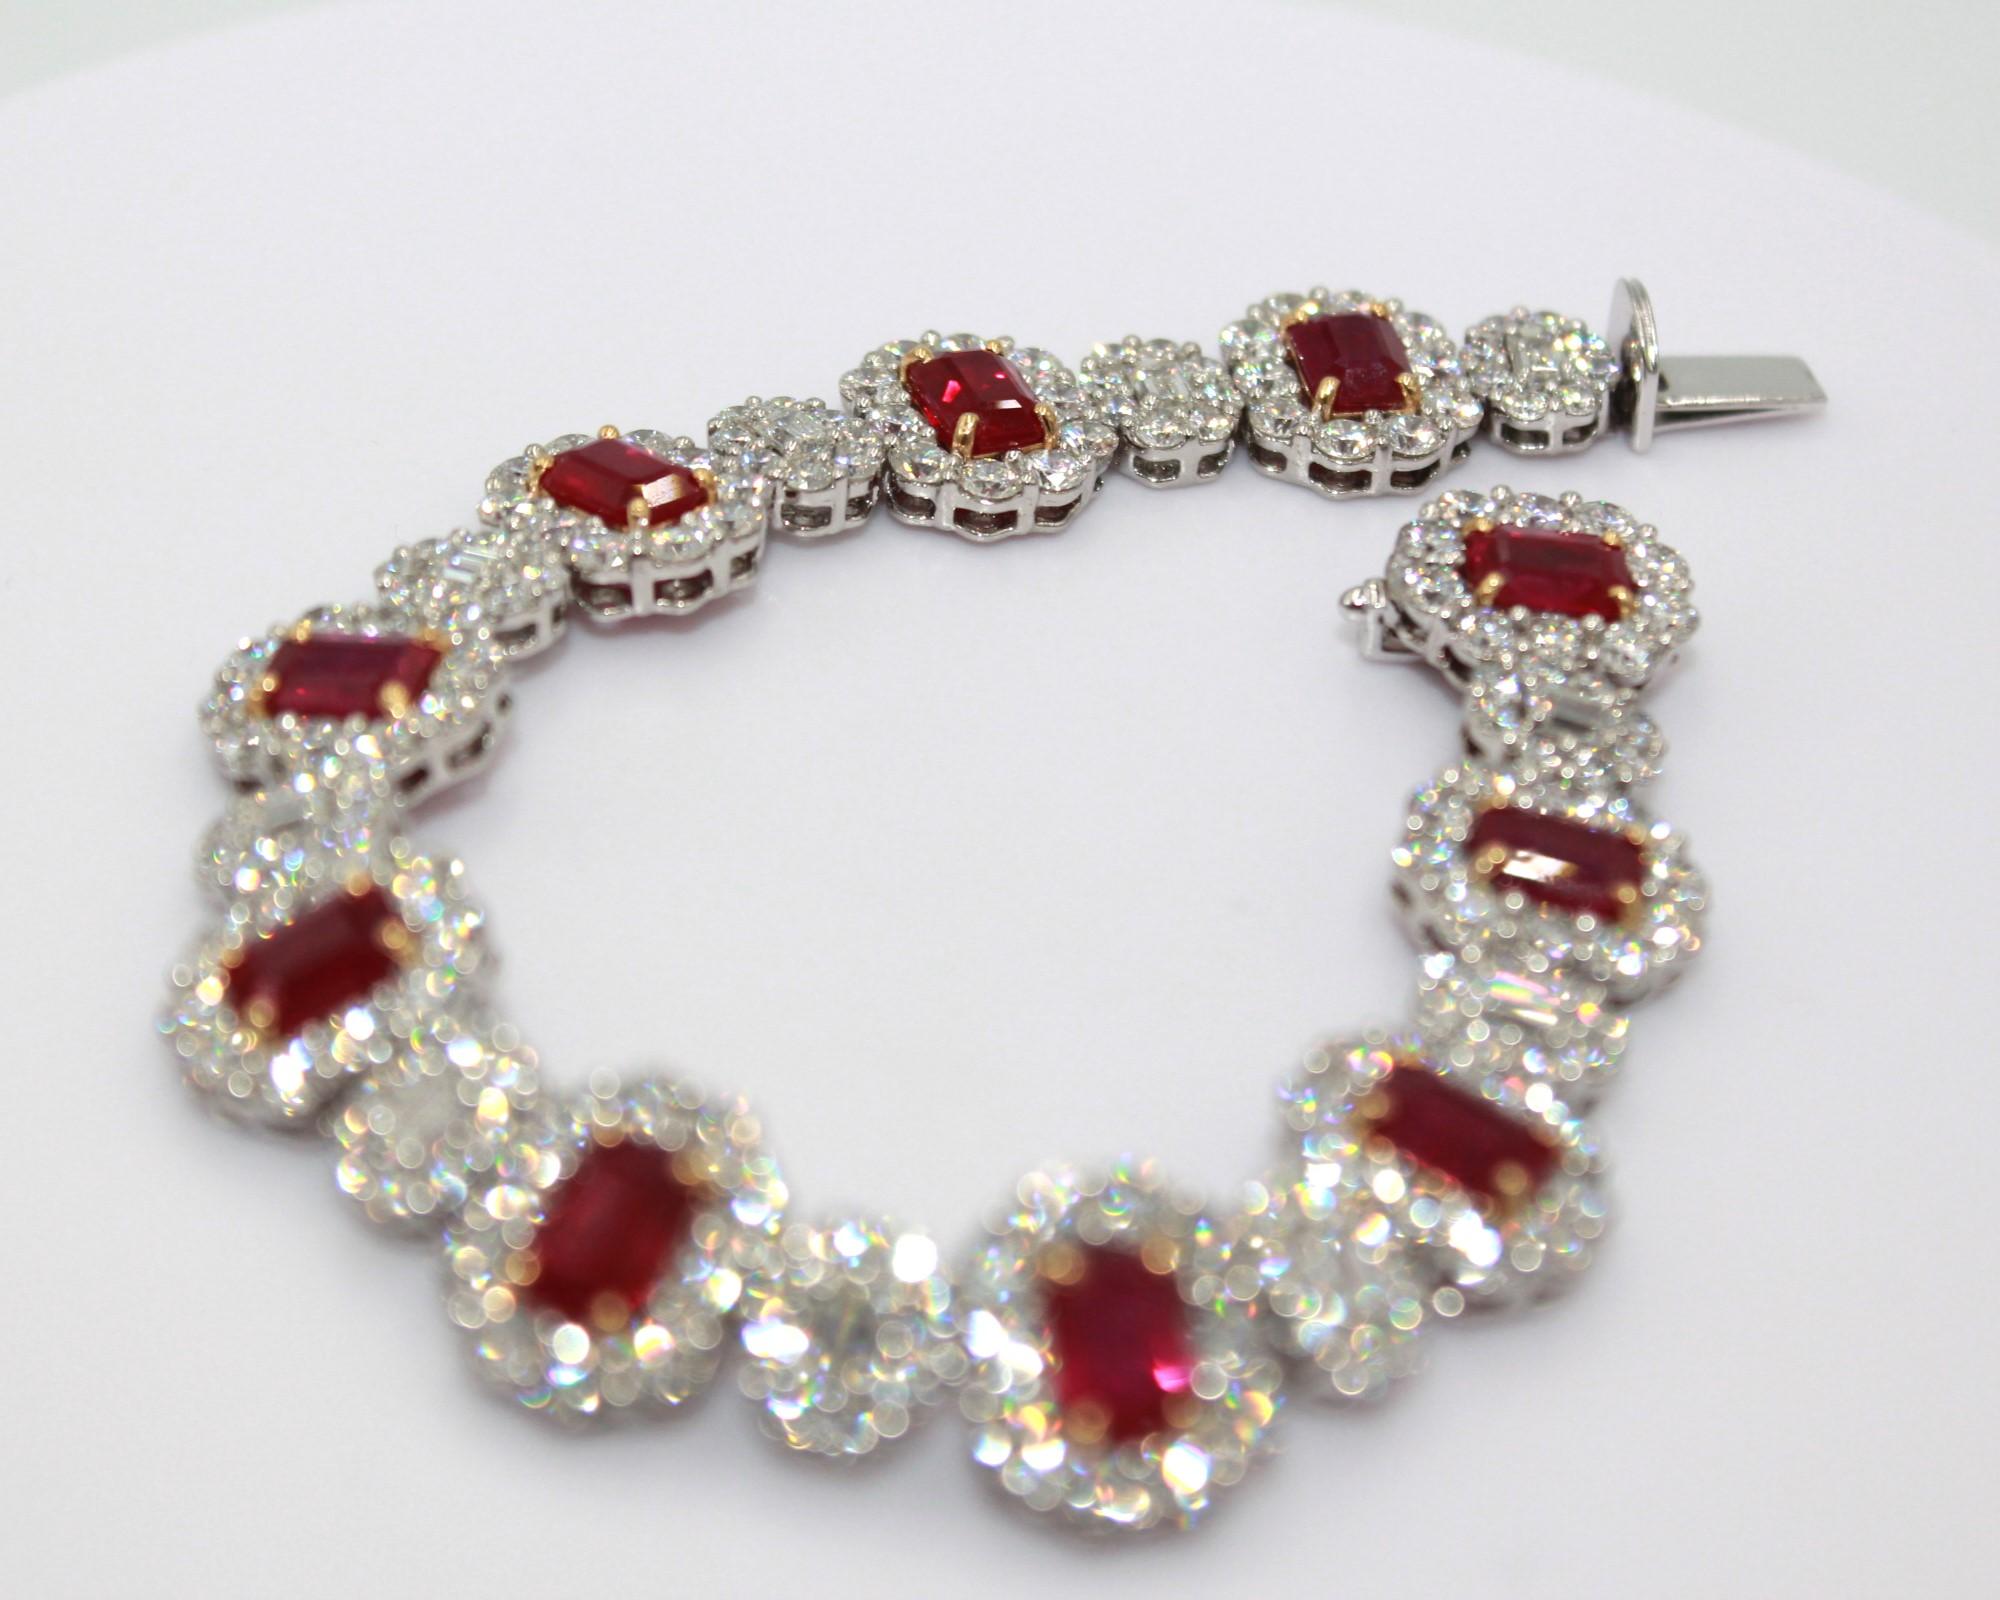 12.12 carats emerald-cut Burma Ruby with totaling a diamond weight of 13.58 carats. 

This stunning Ruby & Diamond Bracelet will highlight your uniqueness and elegance. 

Item Details:
- Type: Bracelet
- Metal: Platinum 

Color Stone Details:
-